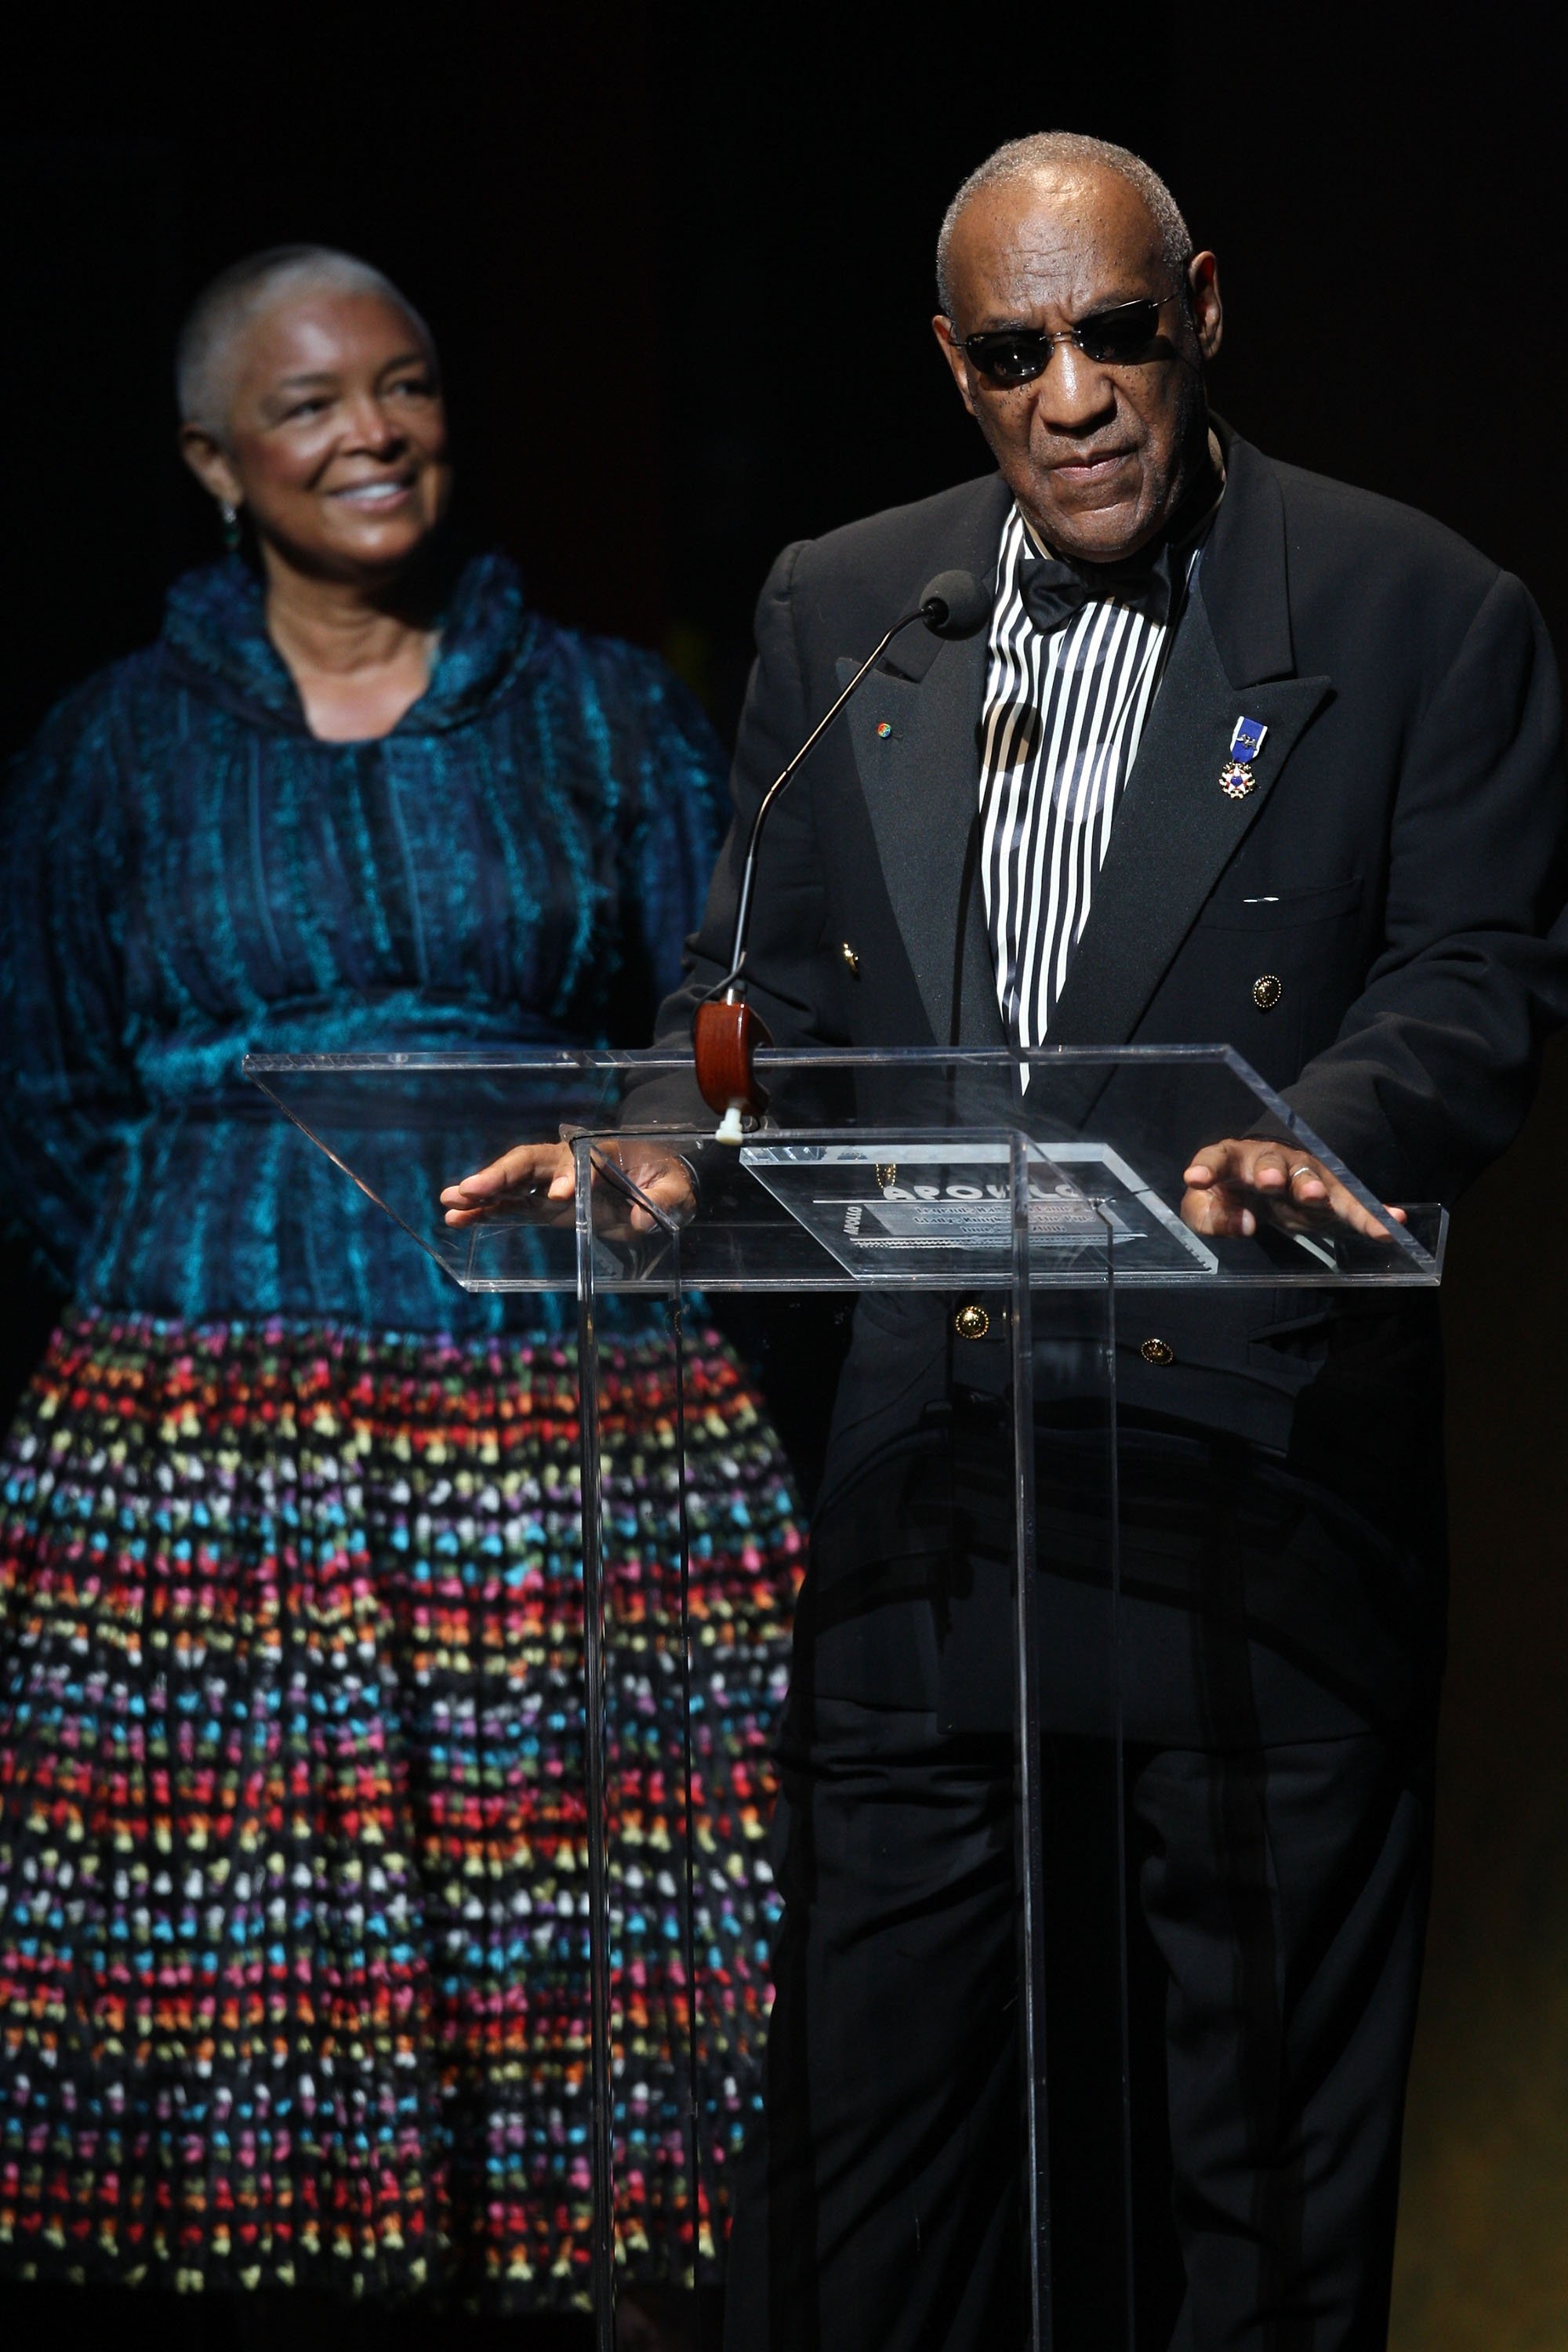 Bill Cosby and his wife Camille speak onstage during the Apollo Theater 75th Anniversary Gala at The Apollo Theater on June 8, 2009 in New York City. | Photo: Getty Images